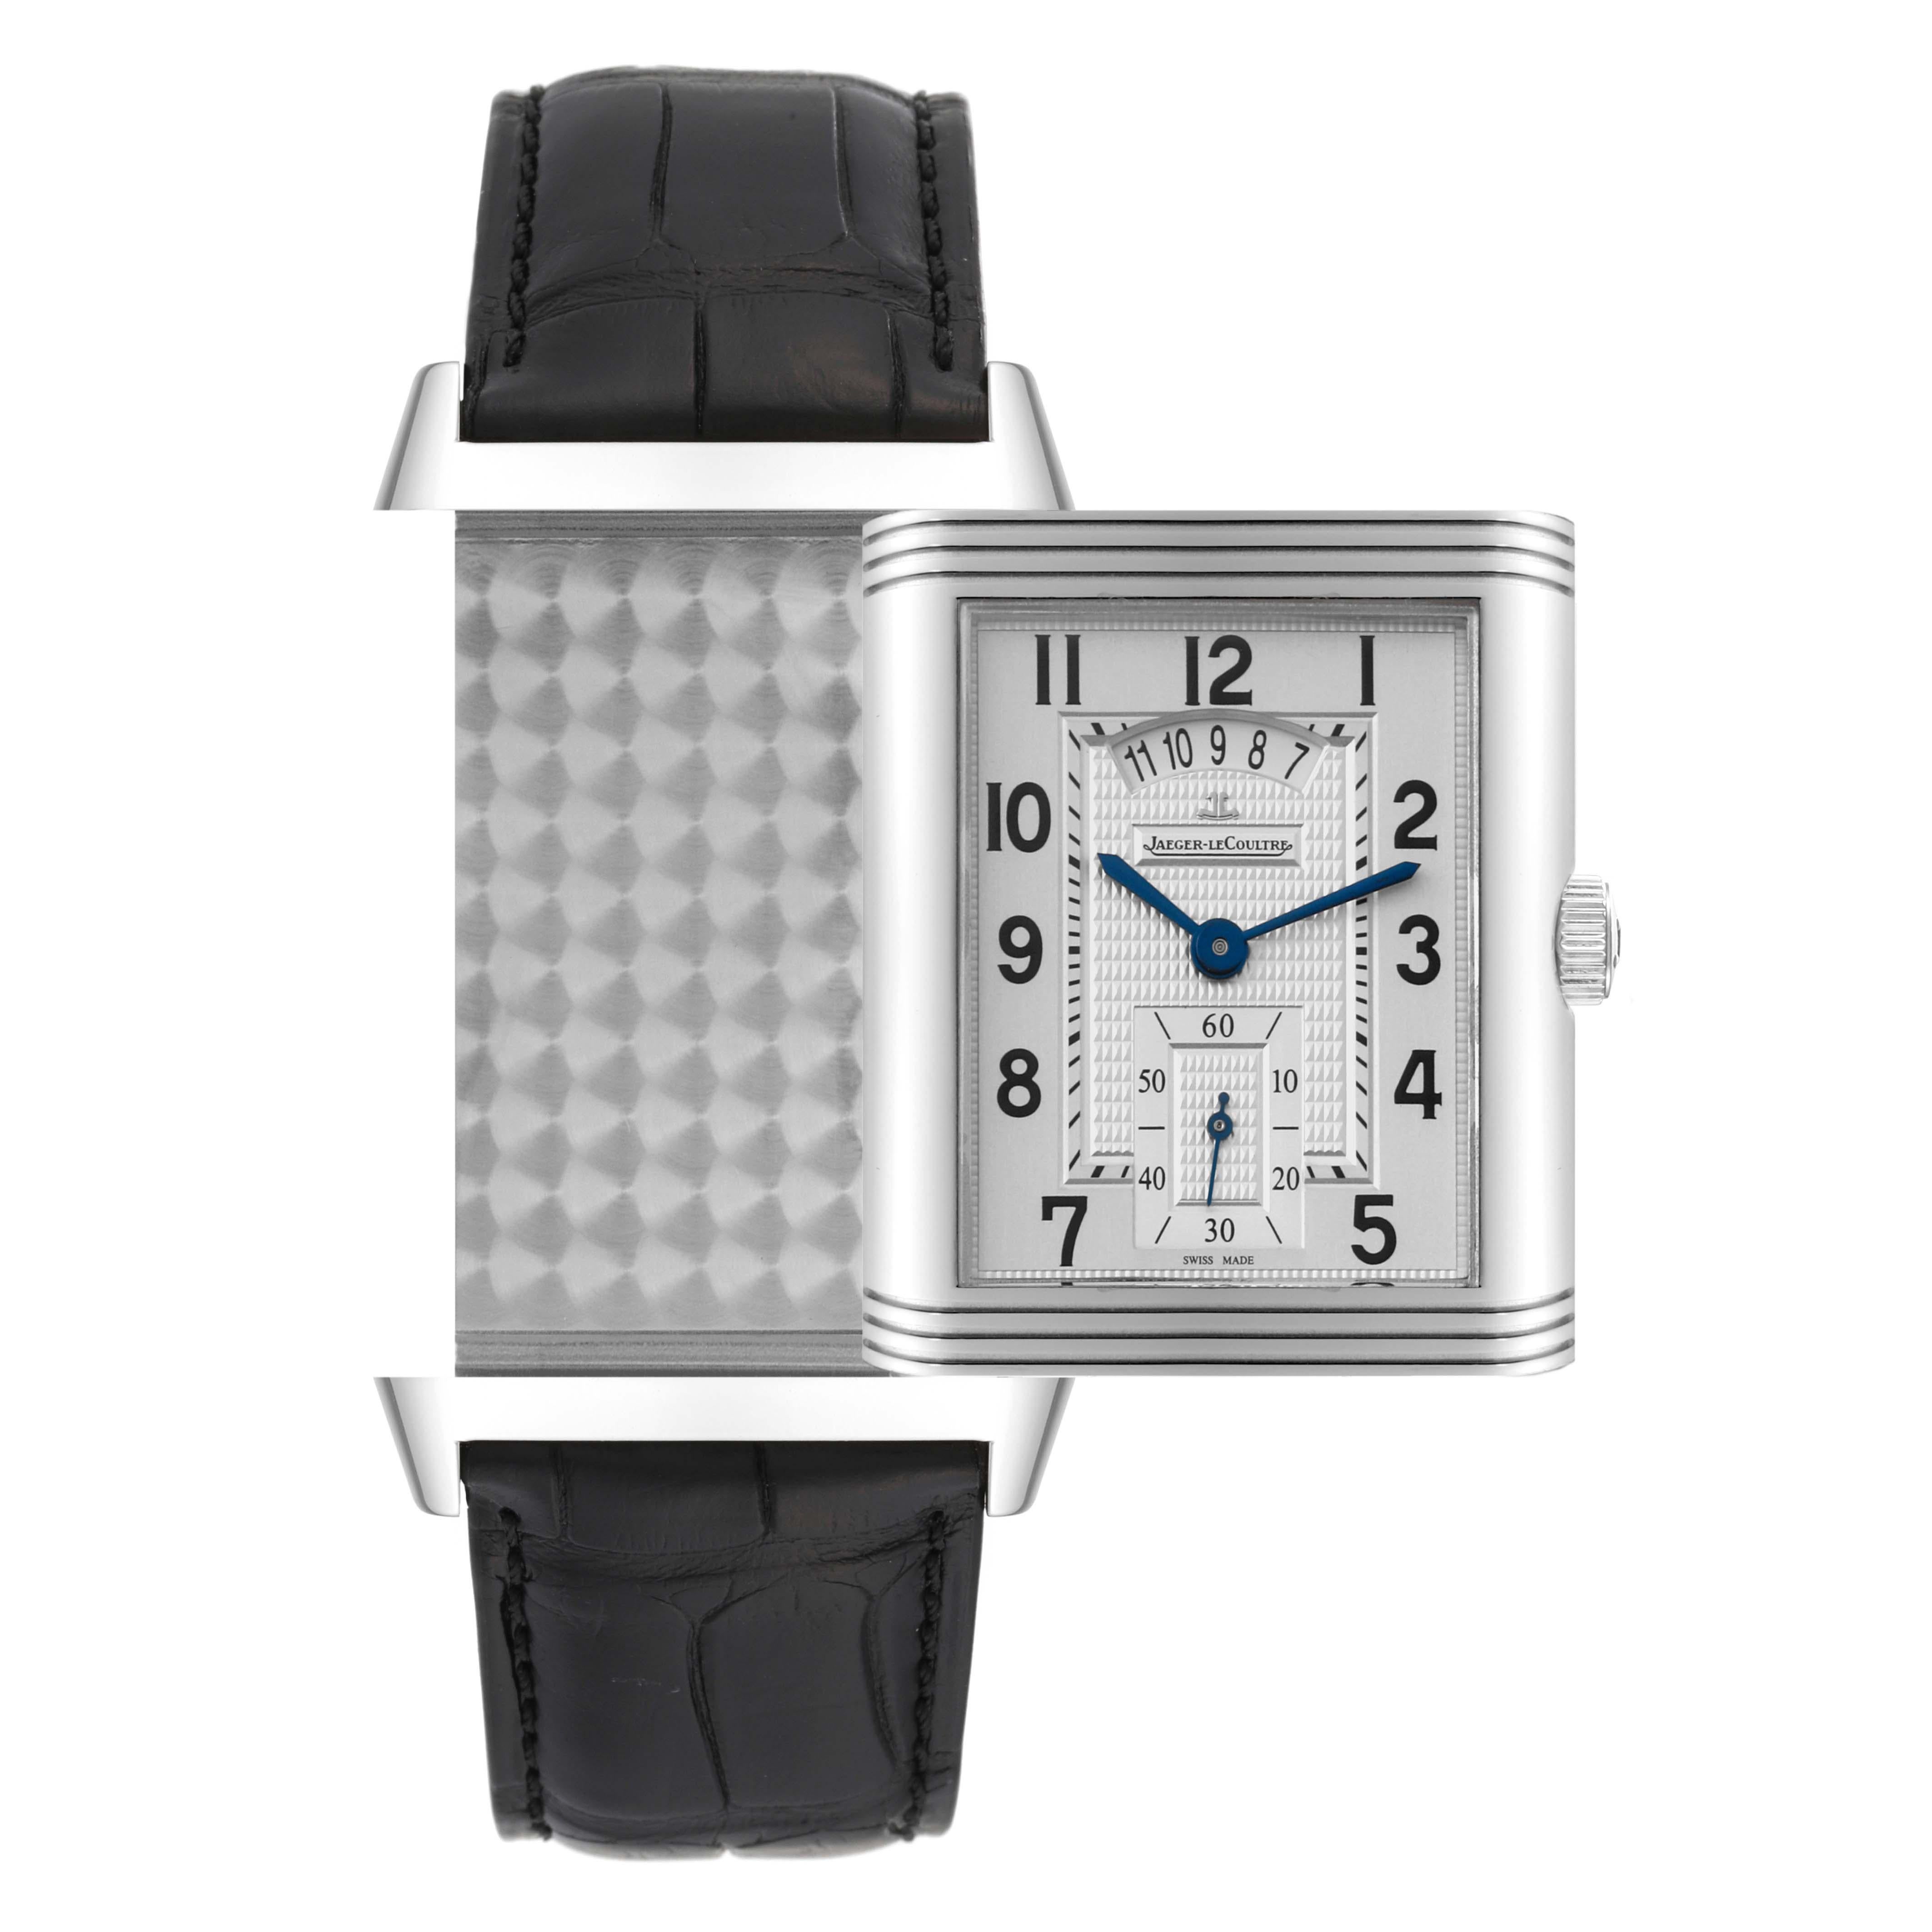 Jaeger LeCoultre Grande Reverso Steel Mens Watch 273.8.85 Q3748421 In Excellent Condition For Sale In Atlanta, GA